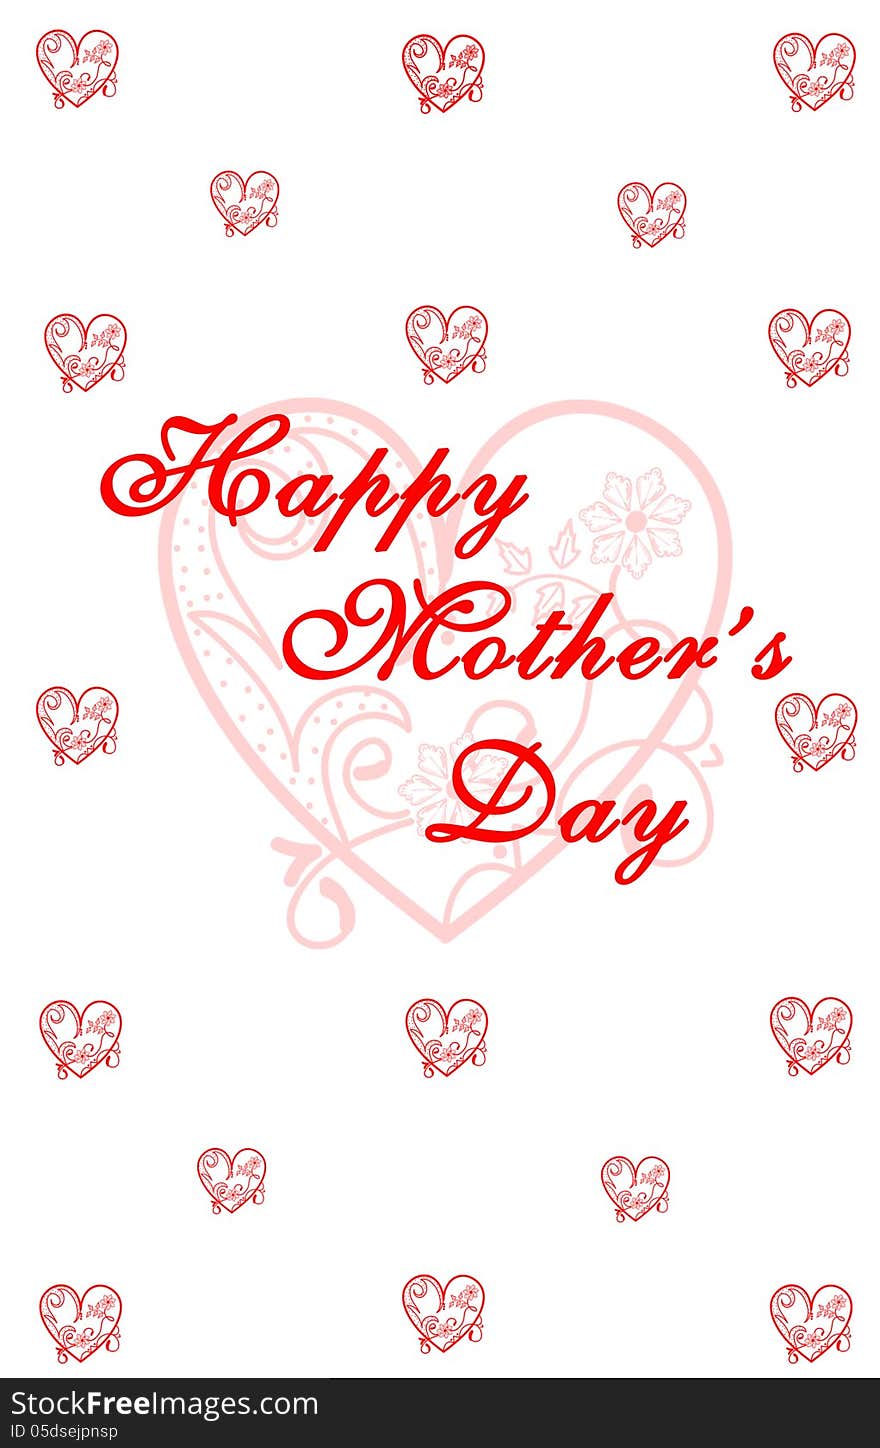 Mothers day greeting in red. Mothers day greeting in red